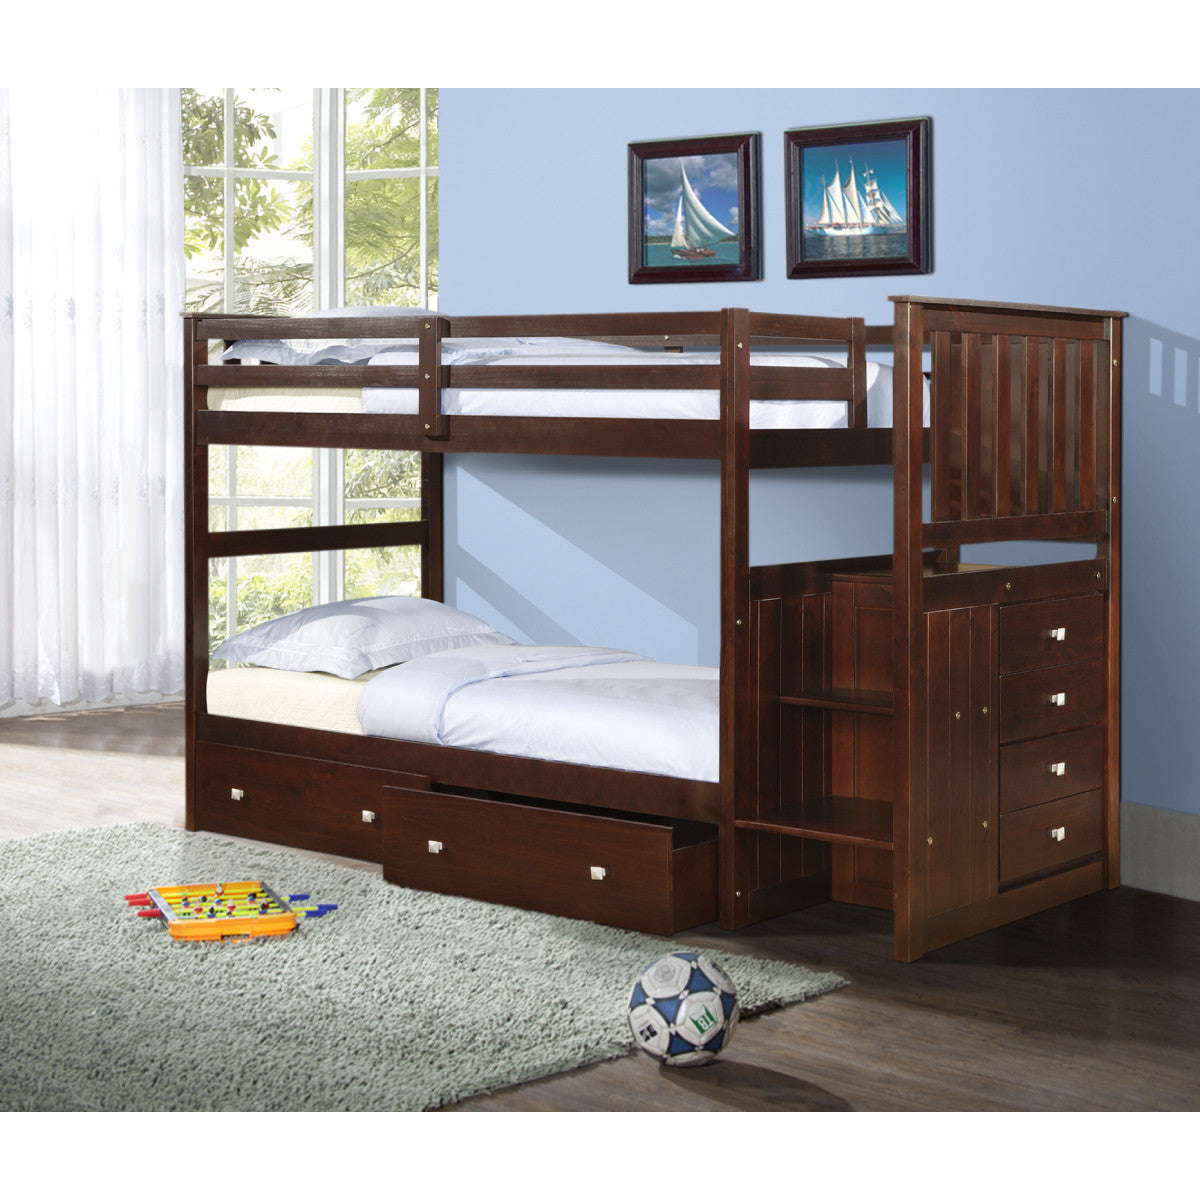 MISSION STAIRWAY BUNK BED WITH DUAL UNDERBED DRAWERS DARK CAPPUCCINO FINISH